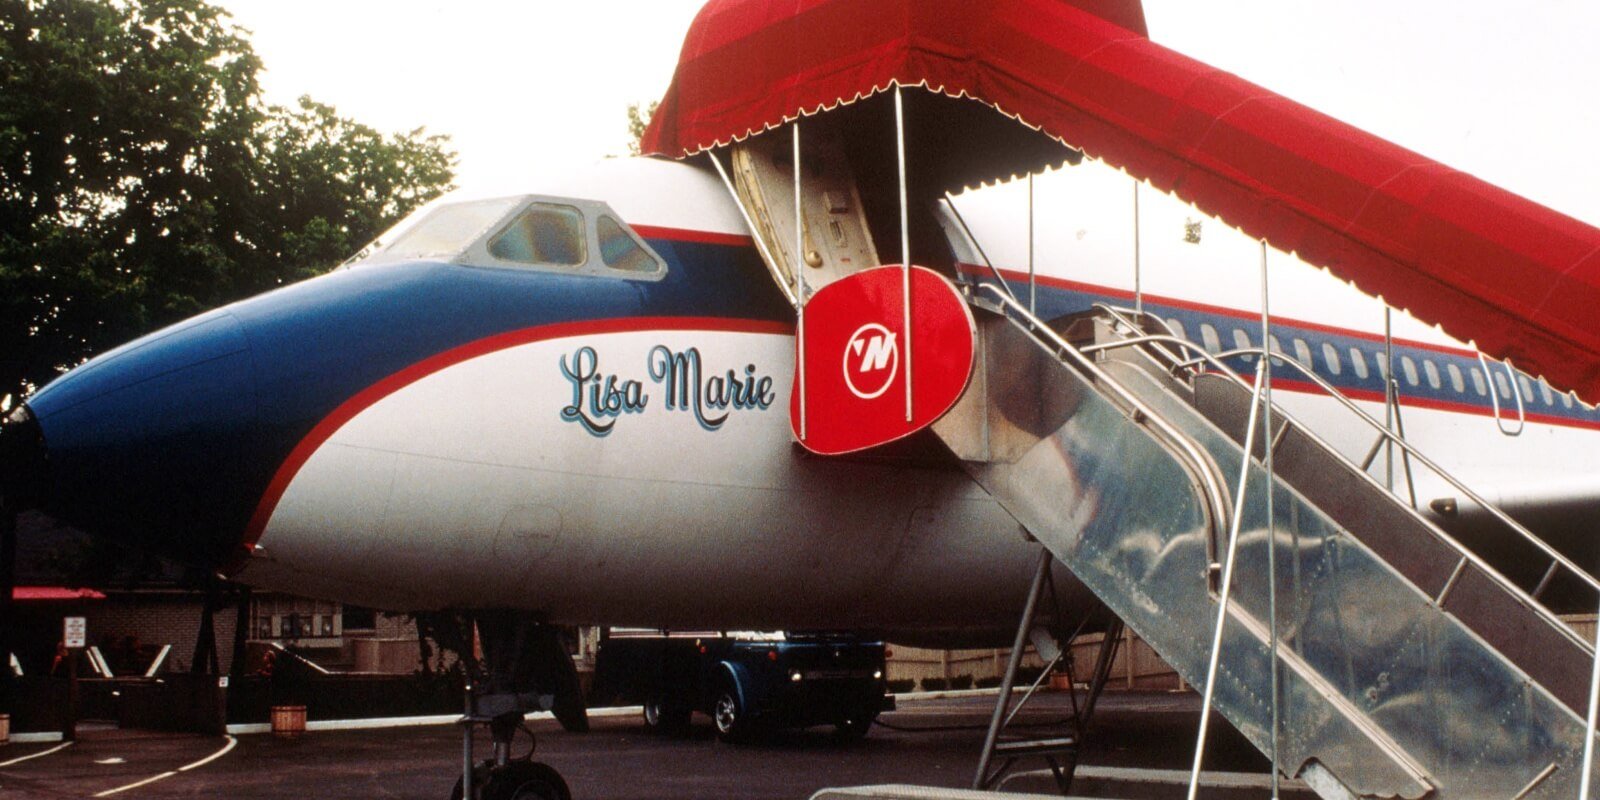 The Lisa Marie plane is an exhibit located at Elvis Presley's Memphis.